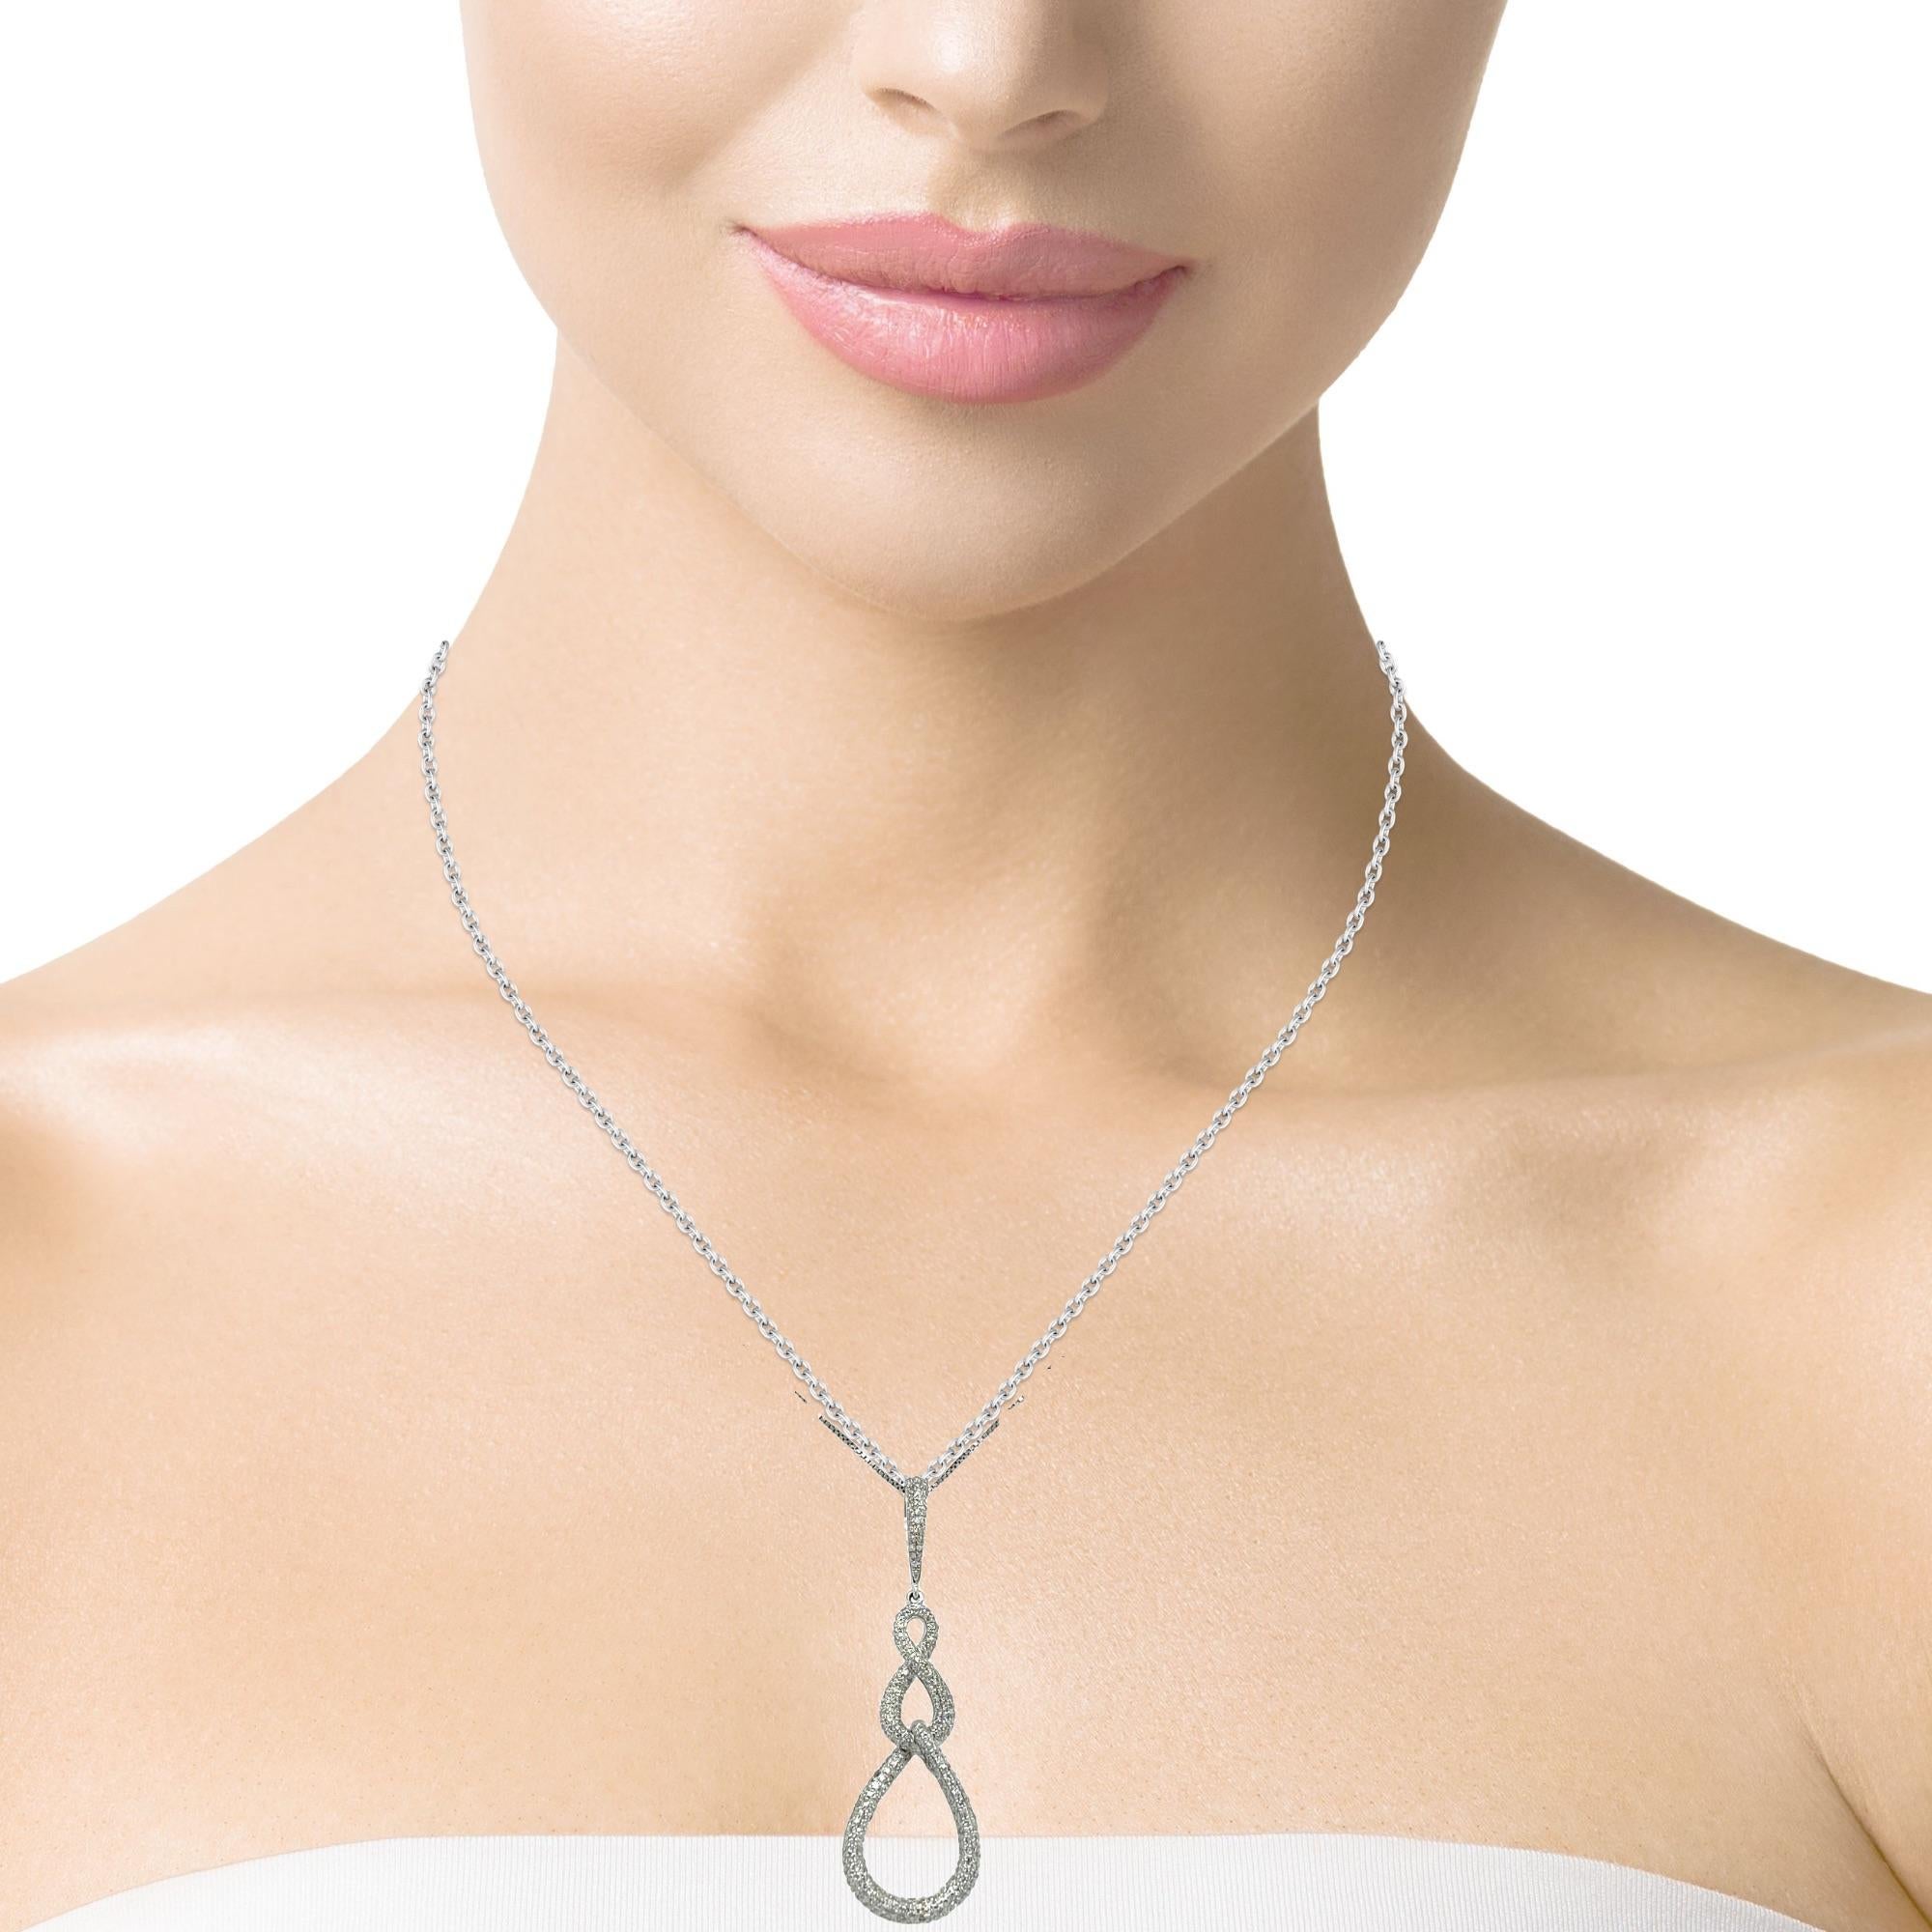 This stunning Dangling Diamond pendant is perfect to wear at that cocktail event. It is 1.75